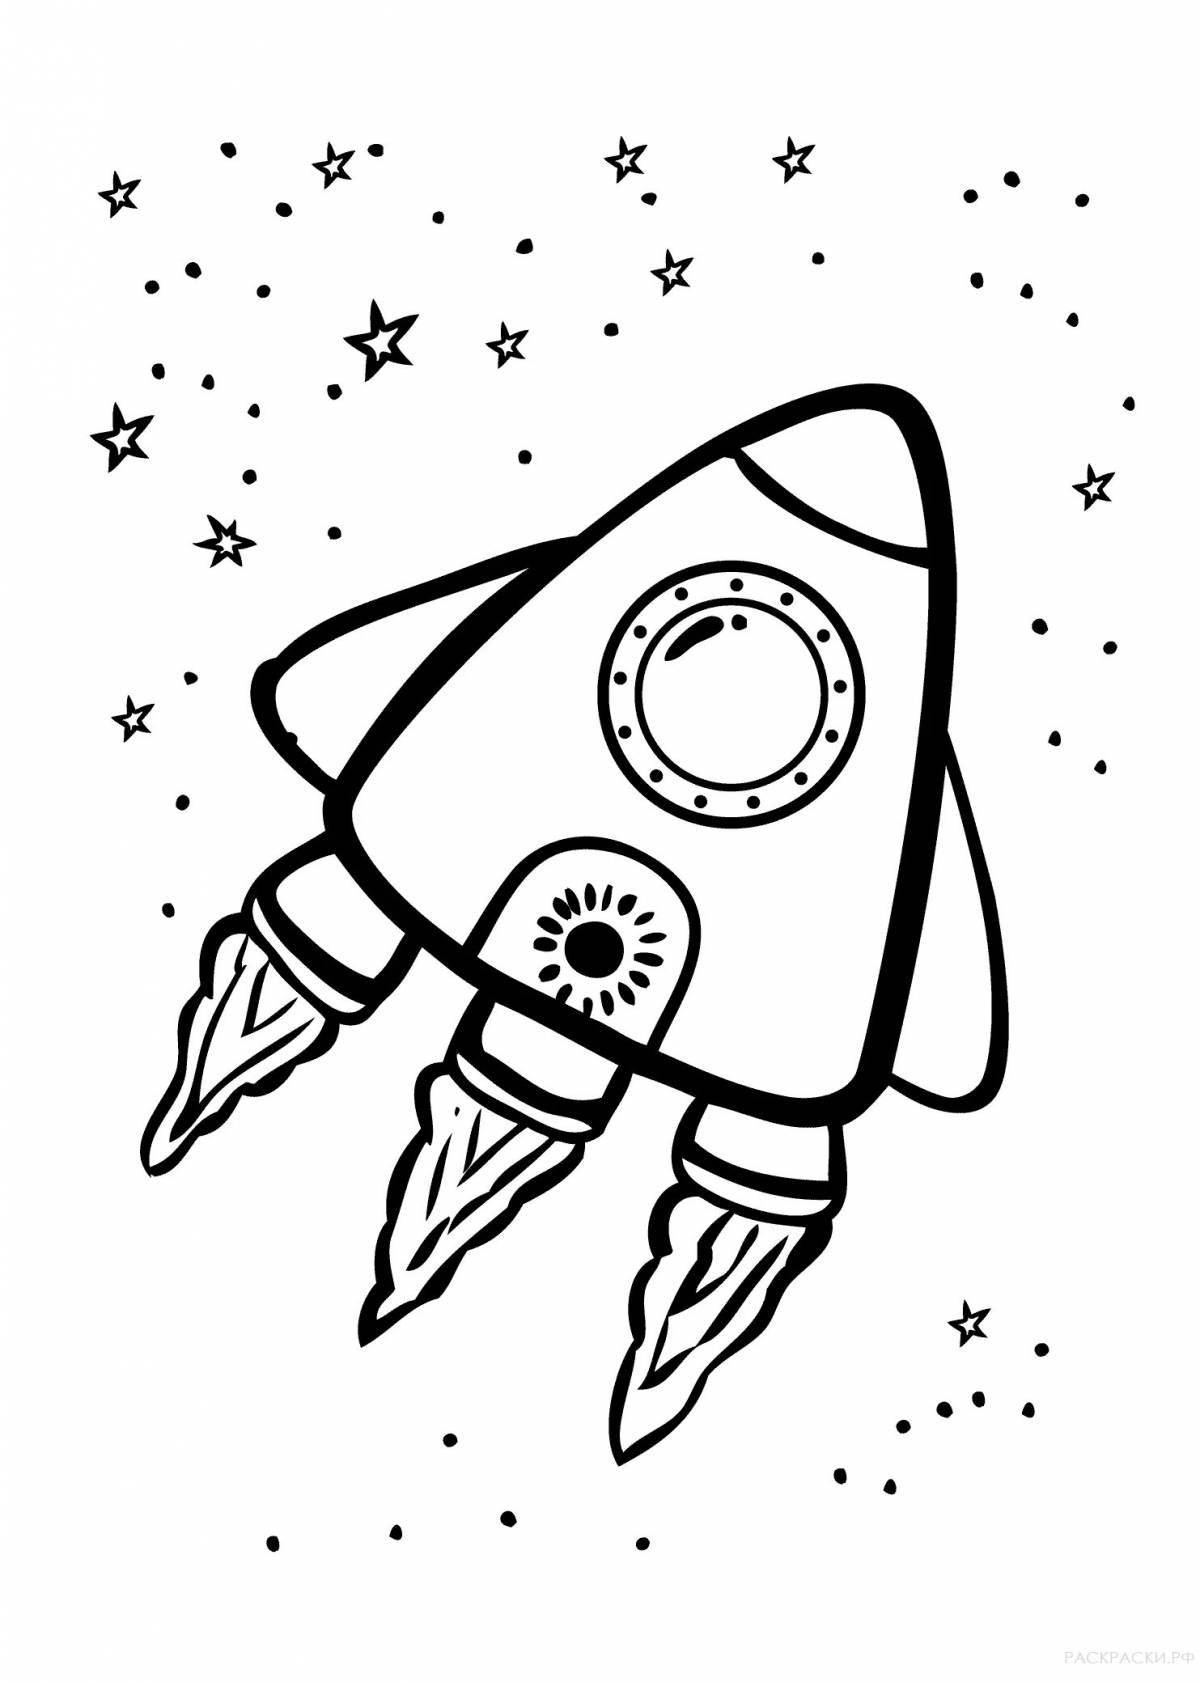 Color-lively rocket coloring page for children 4-5 years old